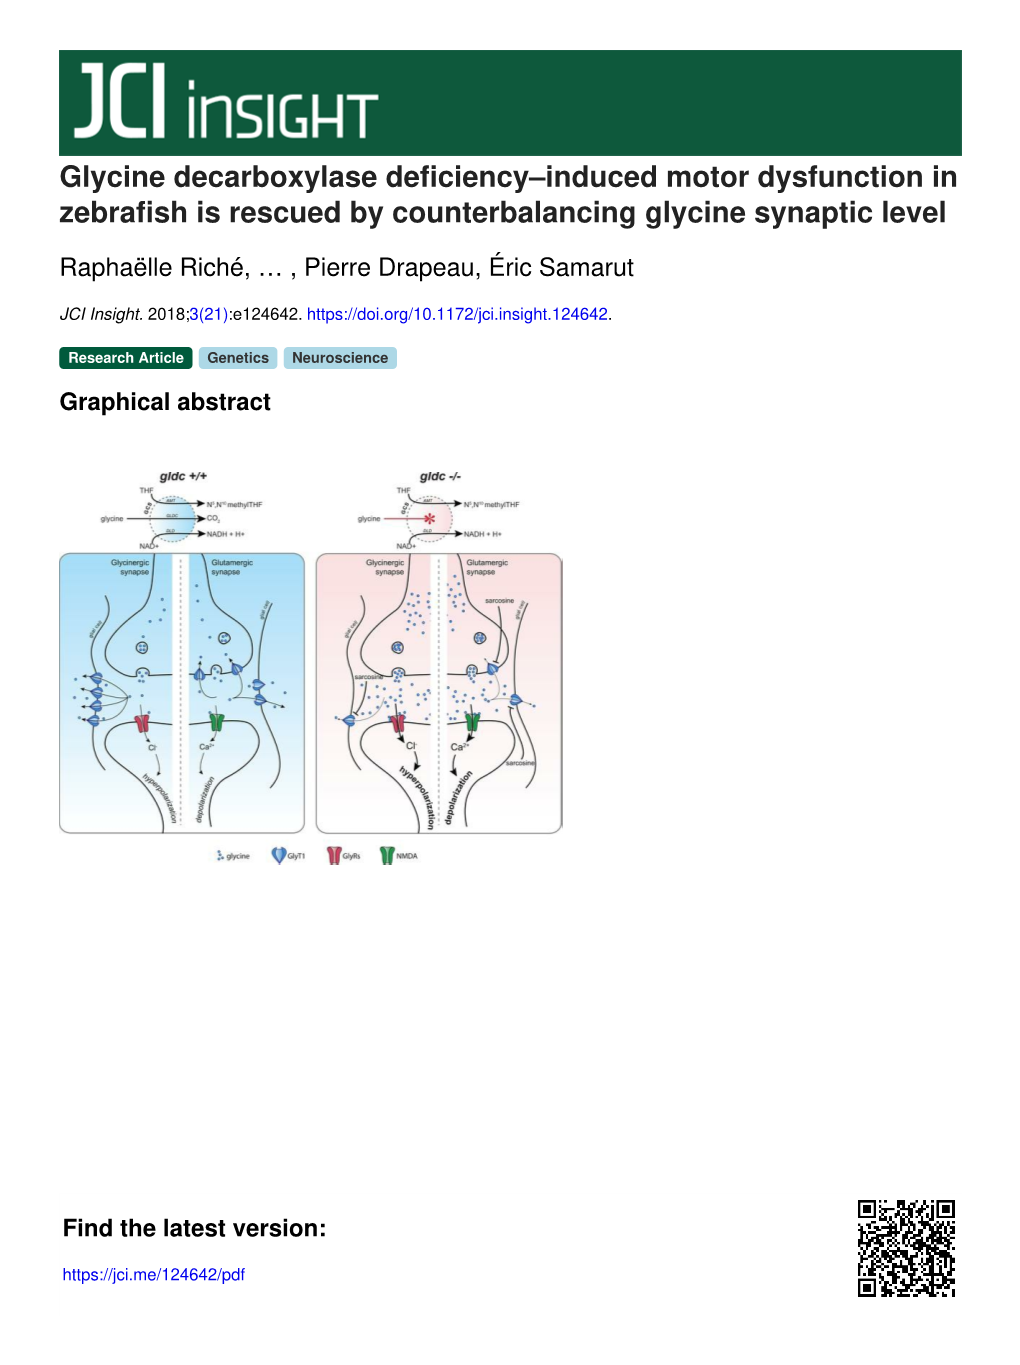 Glycine Decarboxylase Deficiency–Induced Motor Dysfunction in Zebrafish Is Rescued by Counterbalancing Glycine Synaptic Level